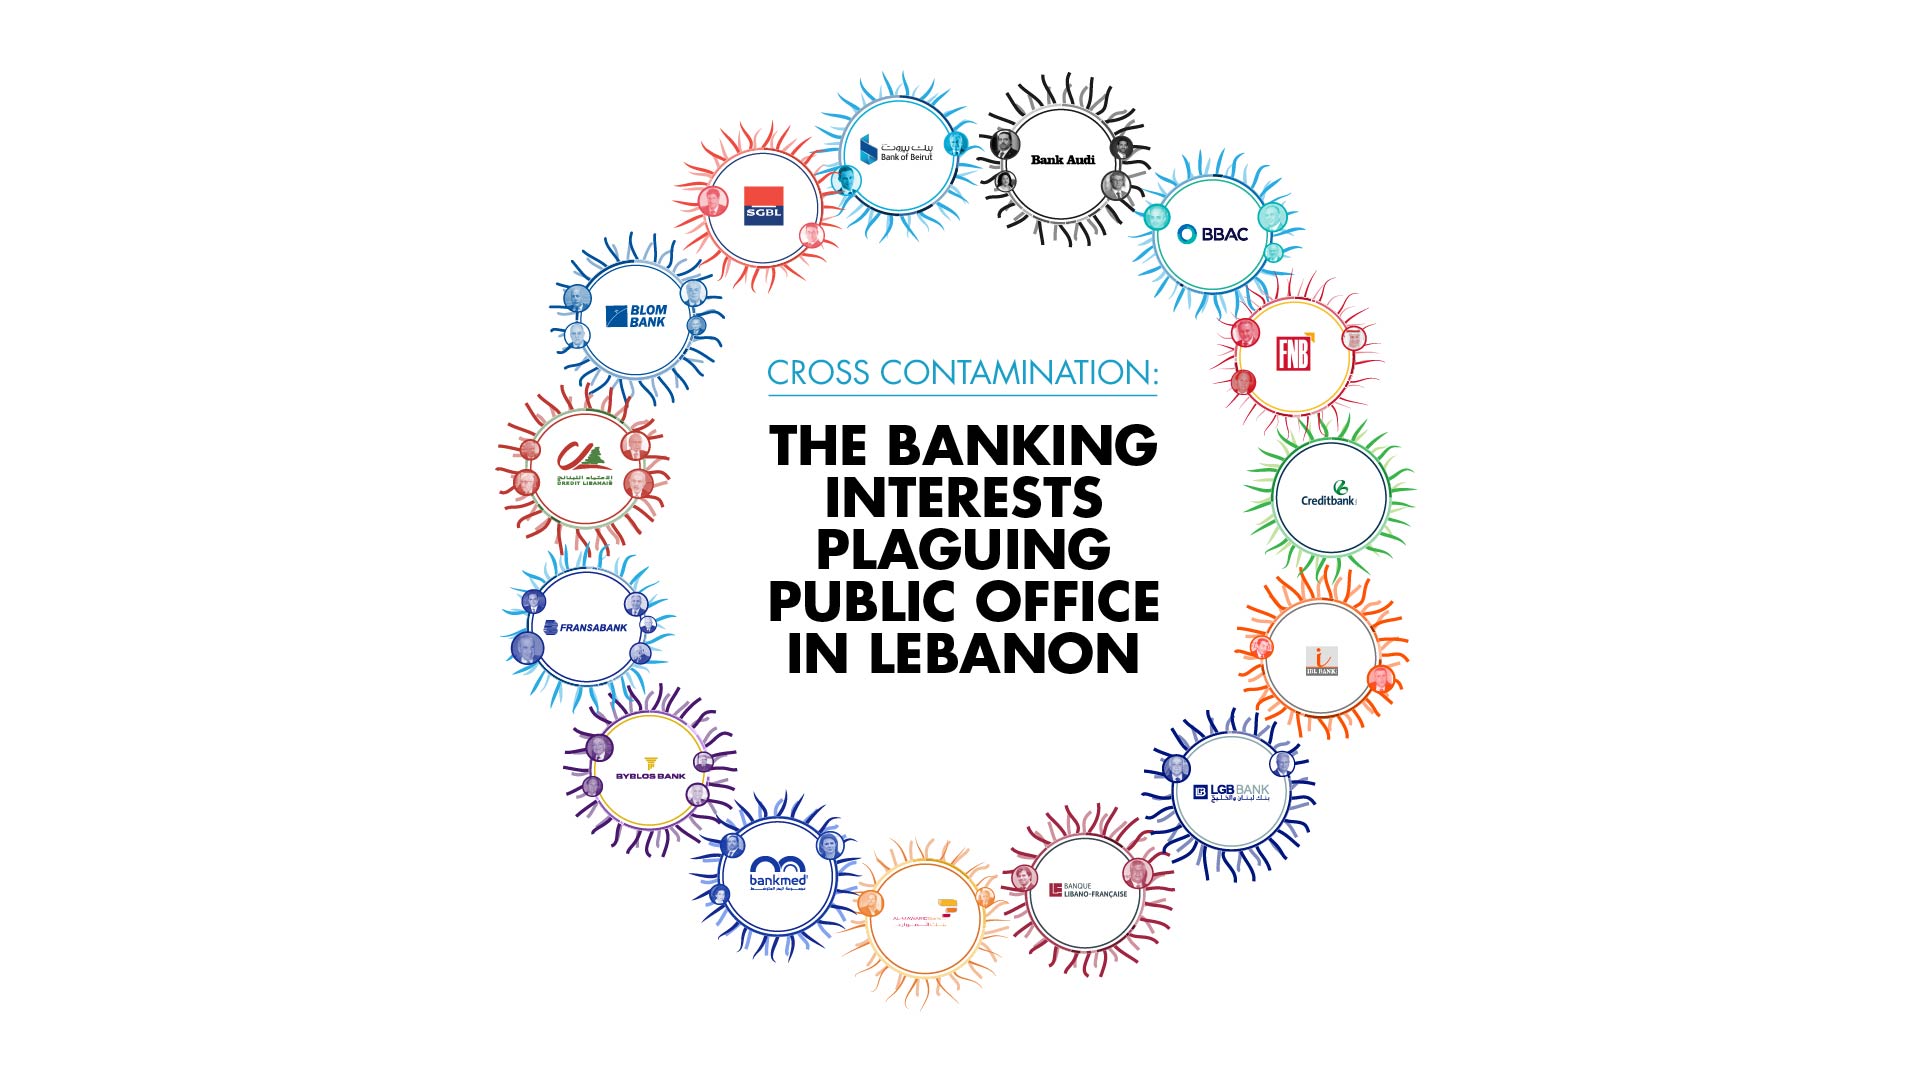 Cross Contamination: The Banking Interests Plaguing Public Office in Lebanon